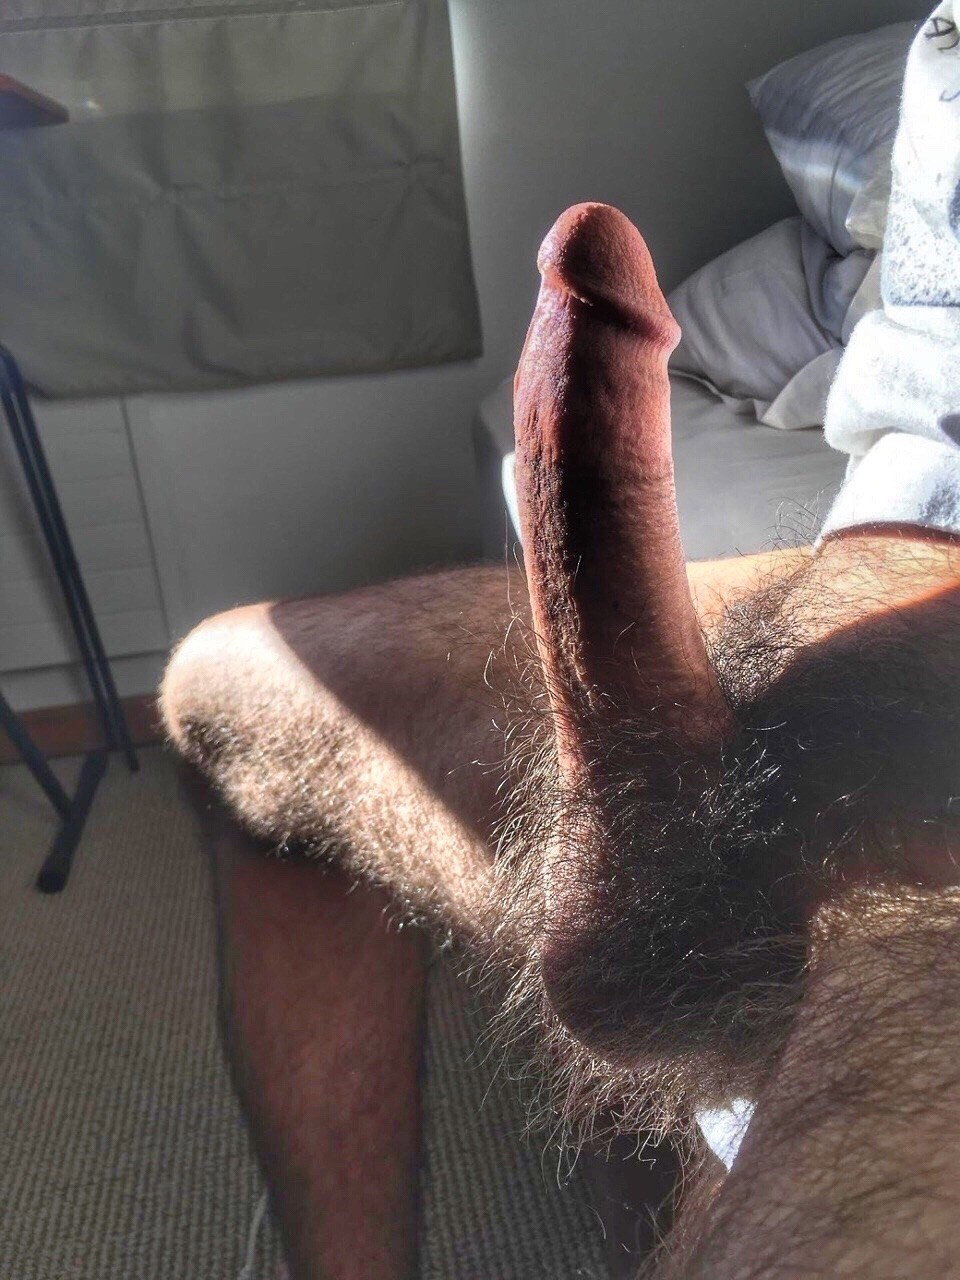 Photo by Smitty with the username @Resol702,  May 22, 2019 at 5:15 AM. The post is about the topic Gay hairy cocks